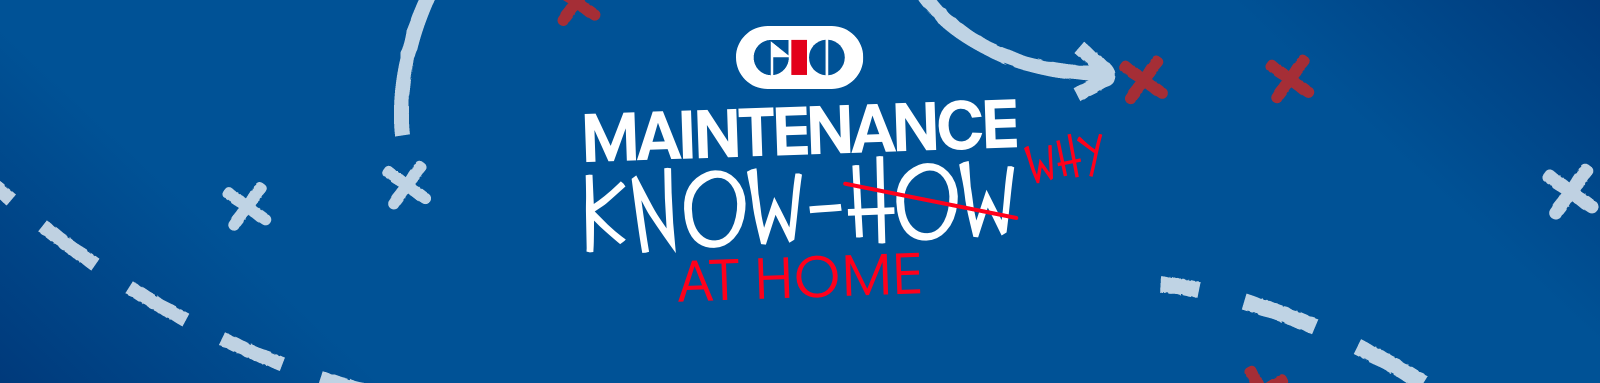 GIO Maintenance Know Why At Home banner